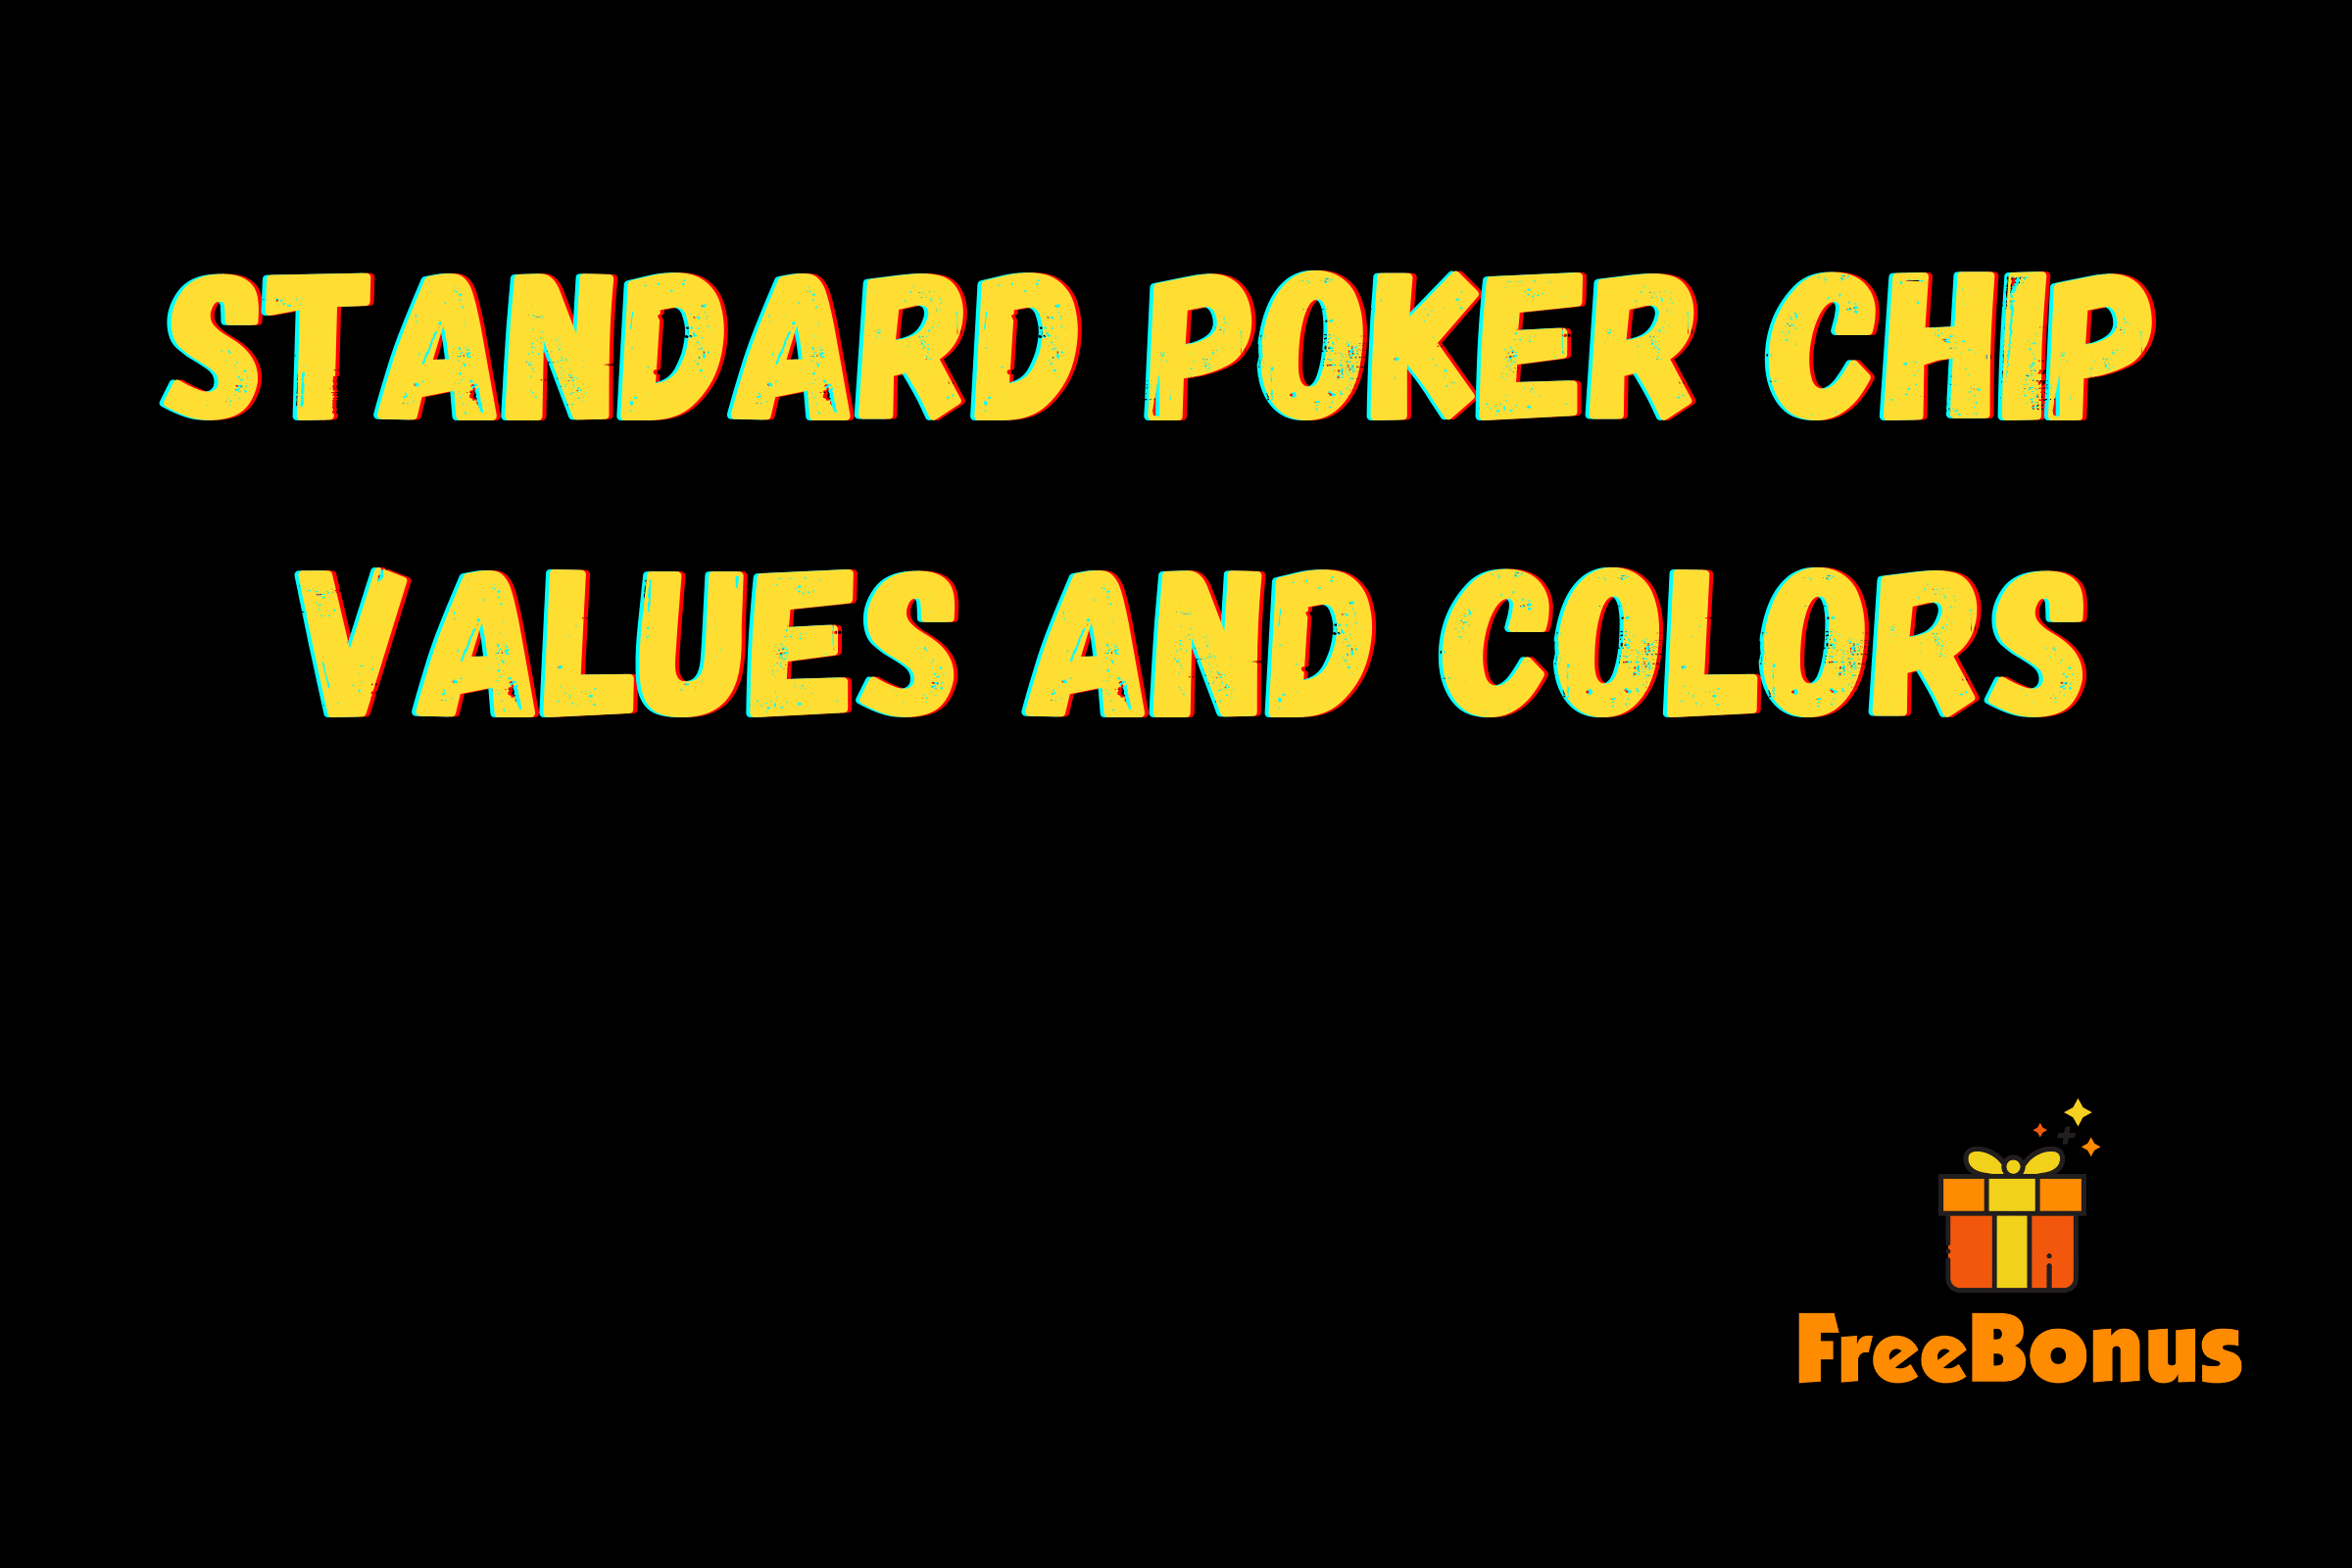 Standard Poker Chip Values and Colors